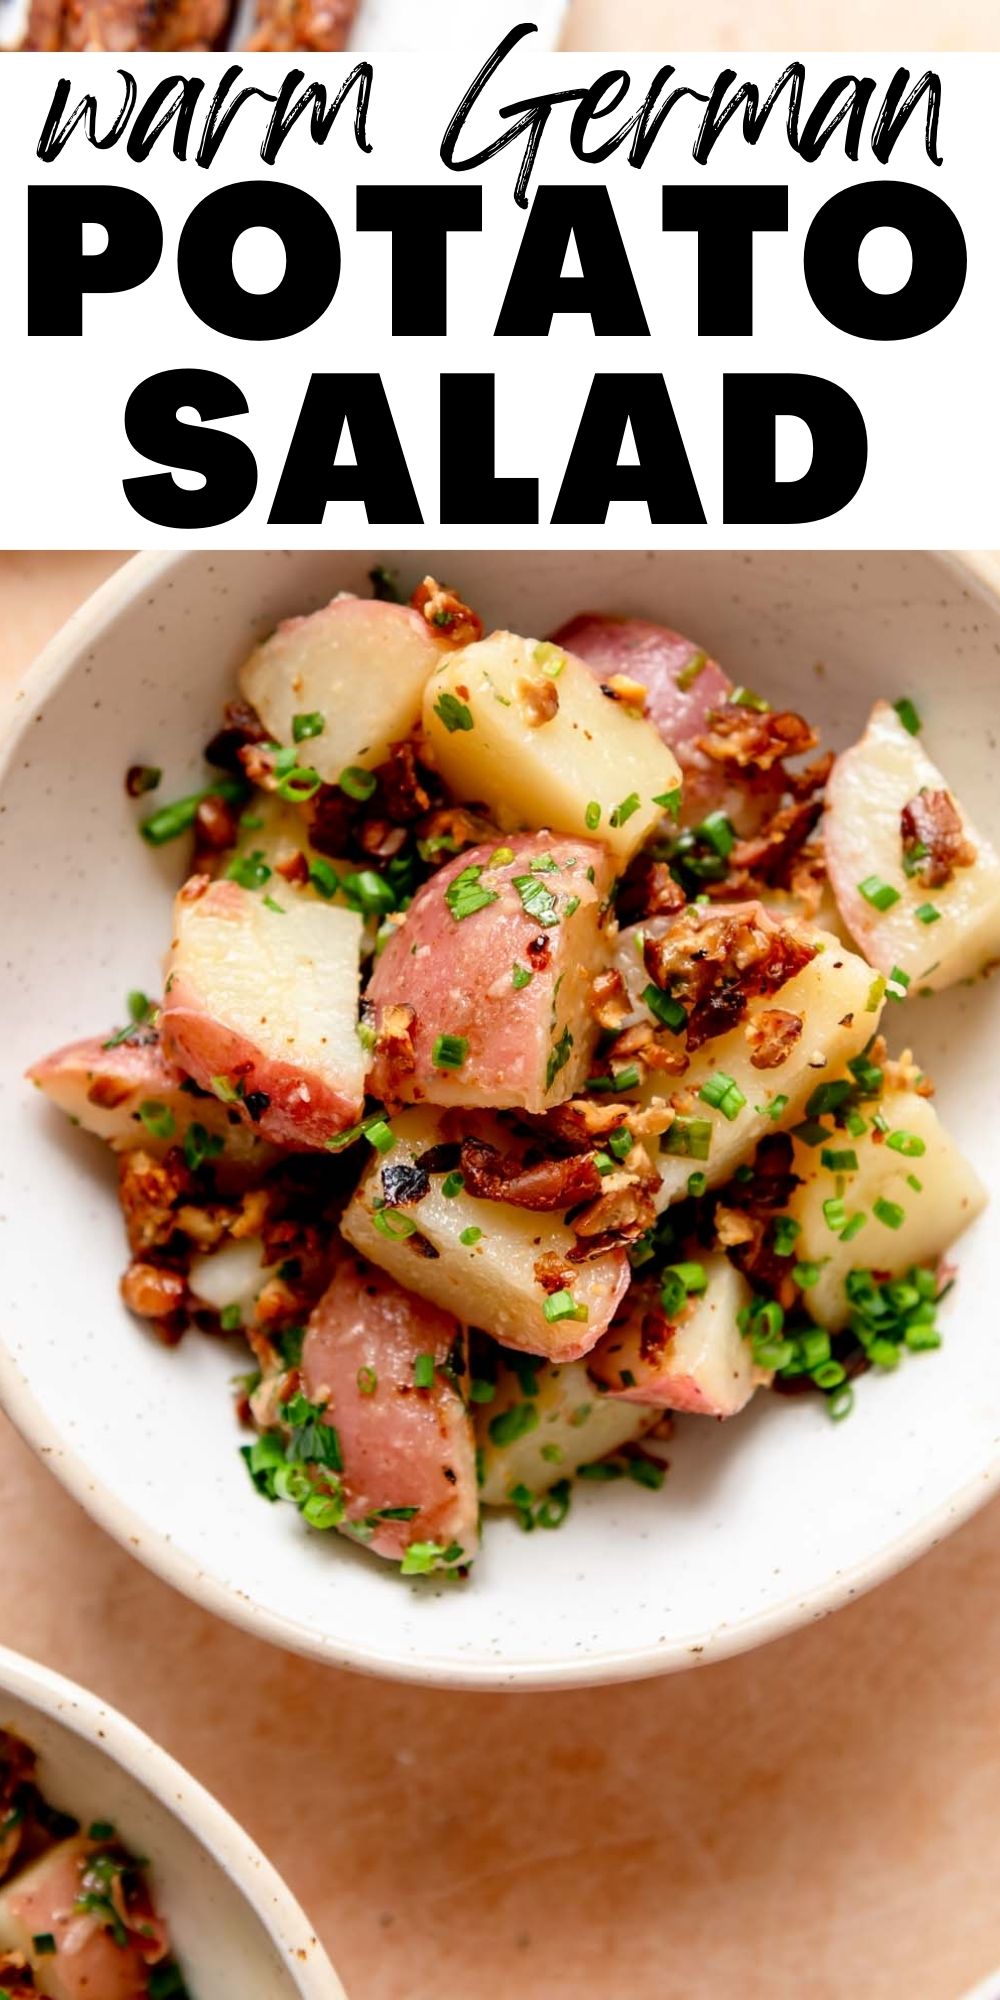 Pinterest graphic with stylized text title and image of a hot potato German-style salad.